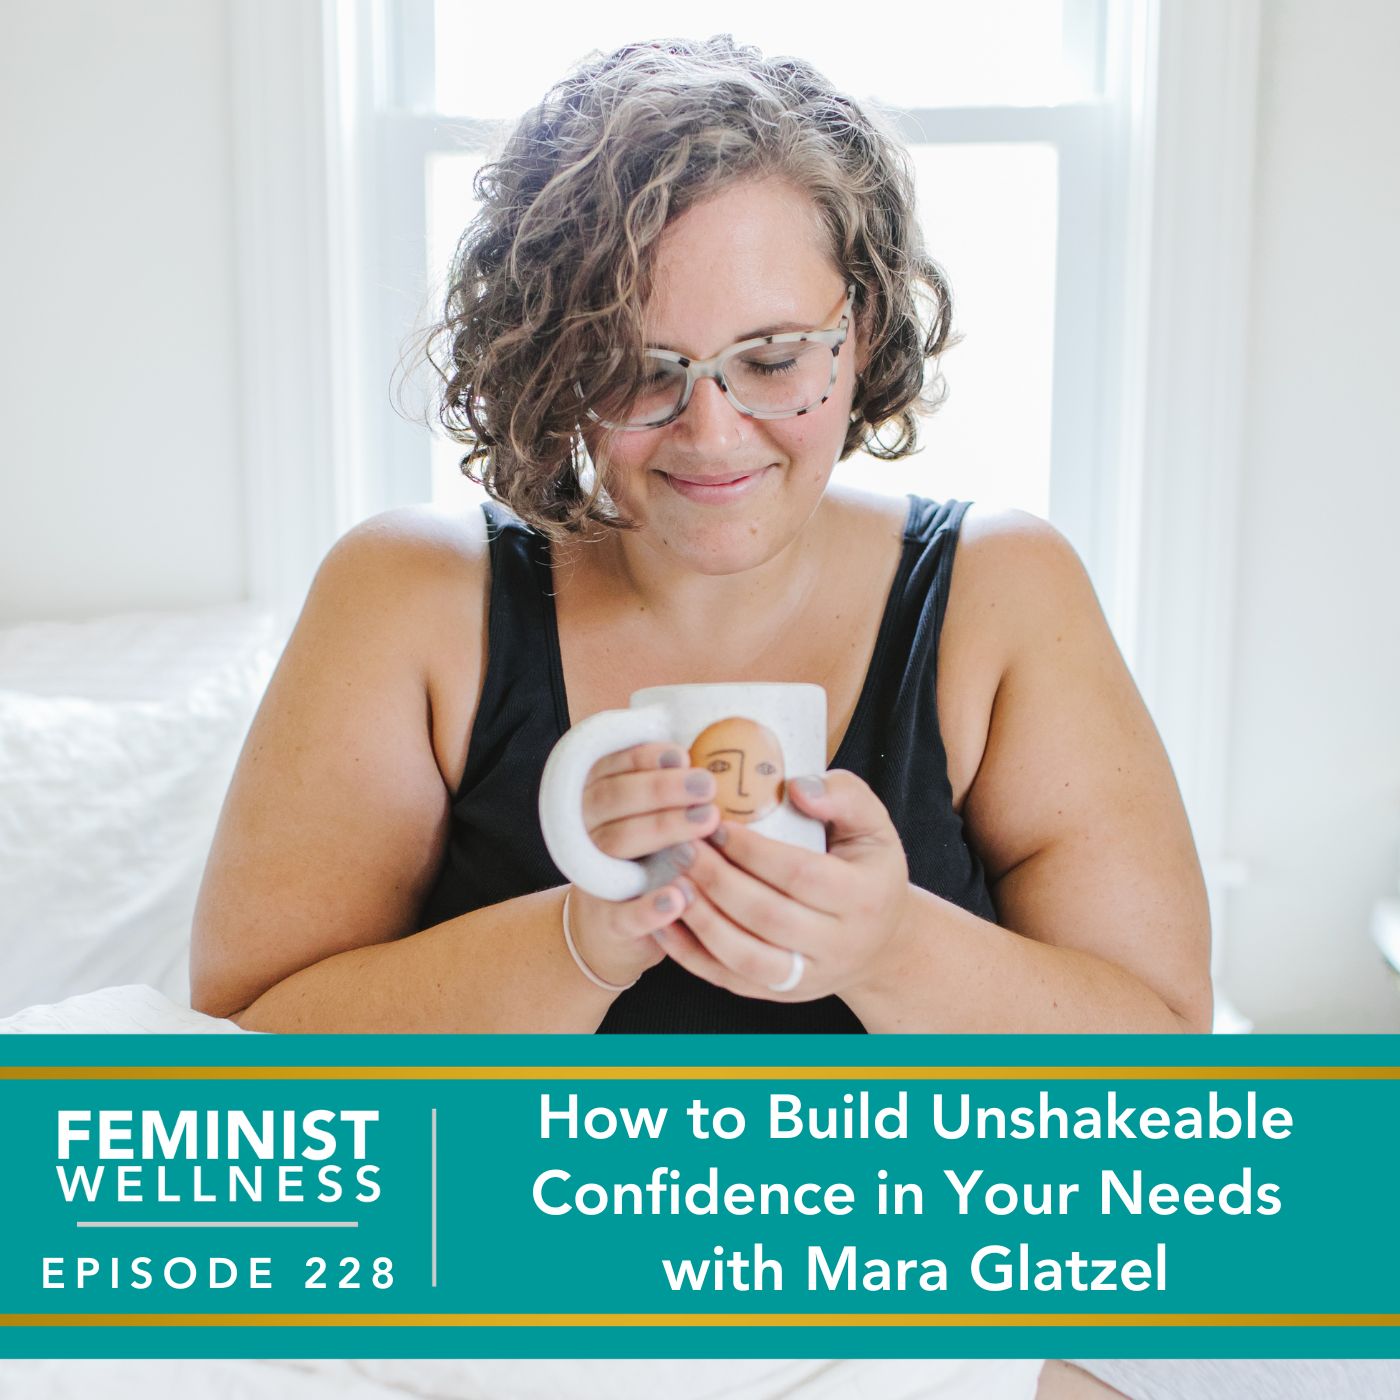 Feminist Wellness with Victoria Albina | How to Build Unshakeable Confidence in Your Needs with Mara Glatzel